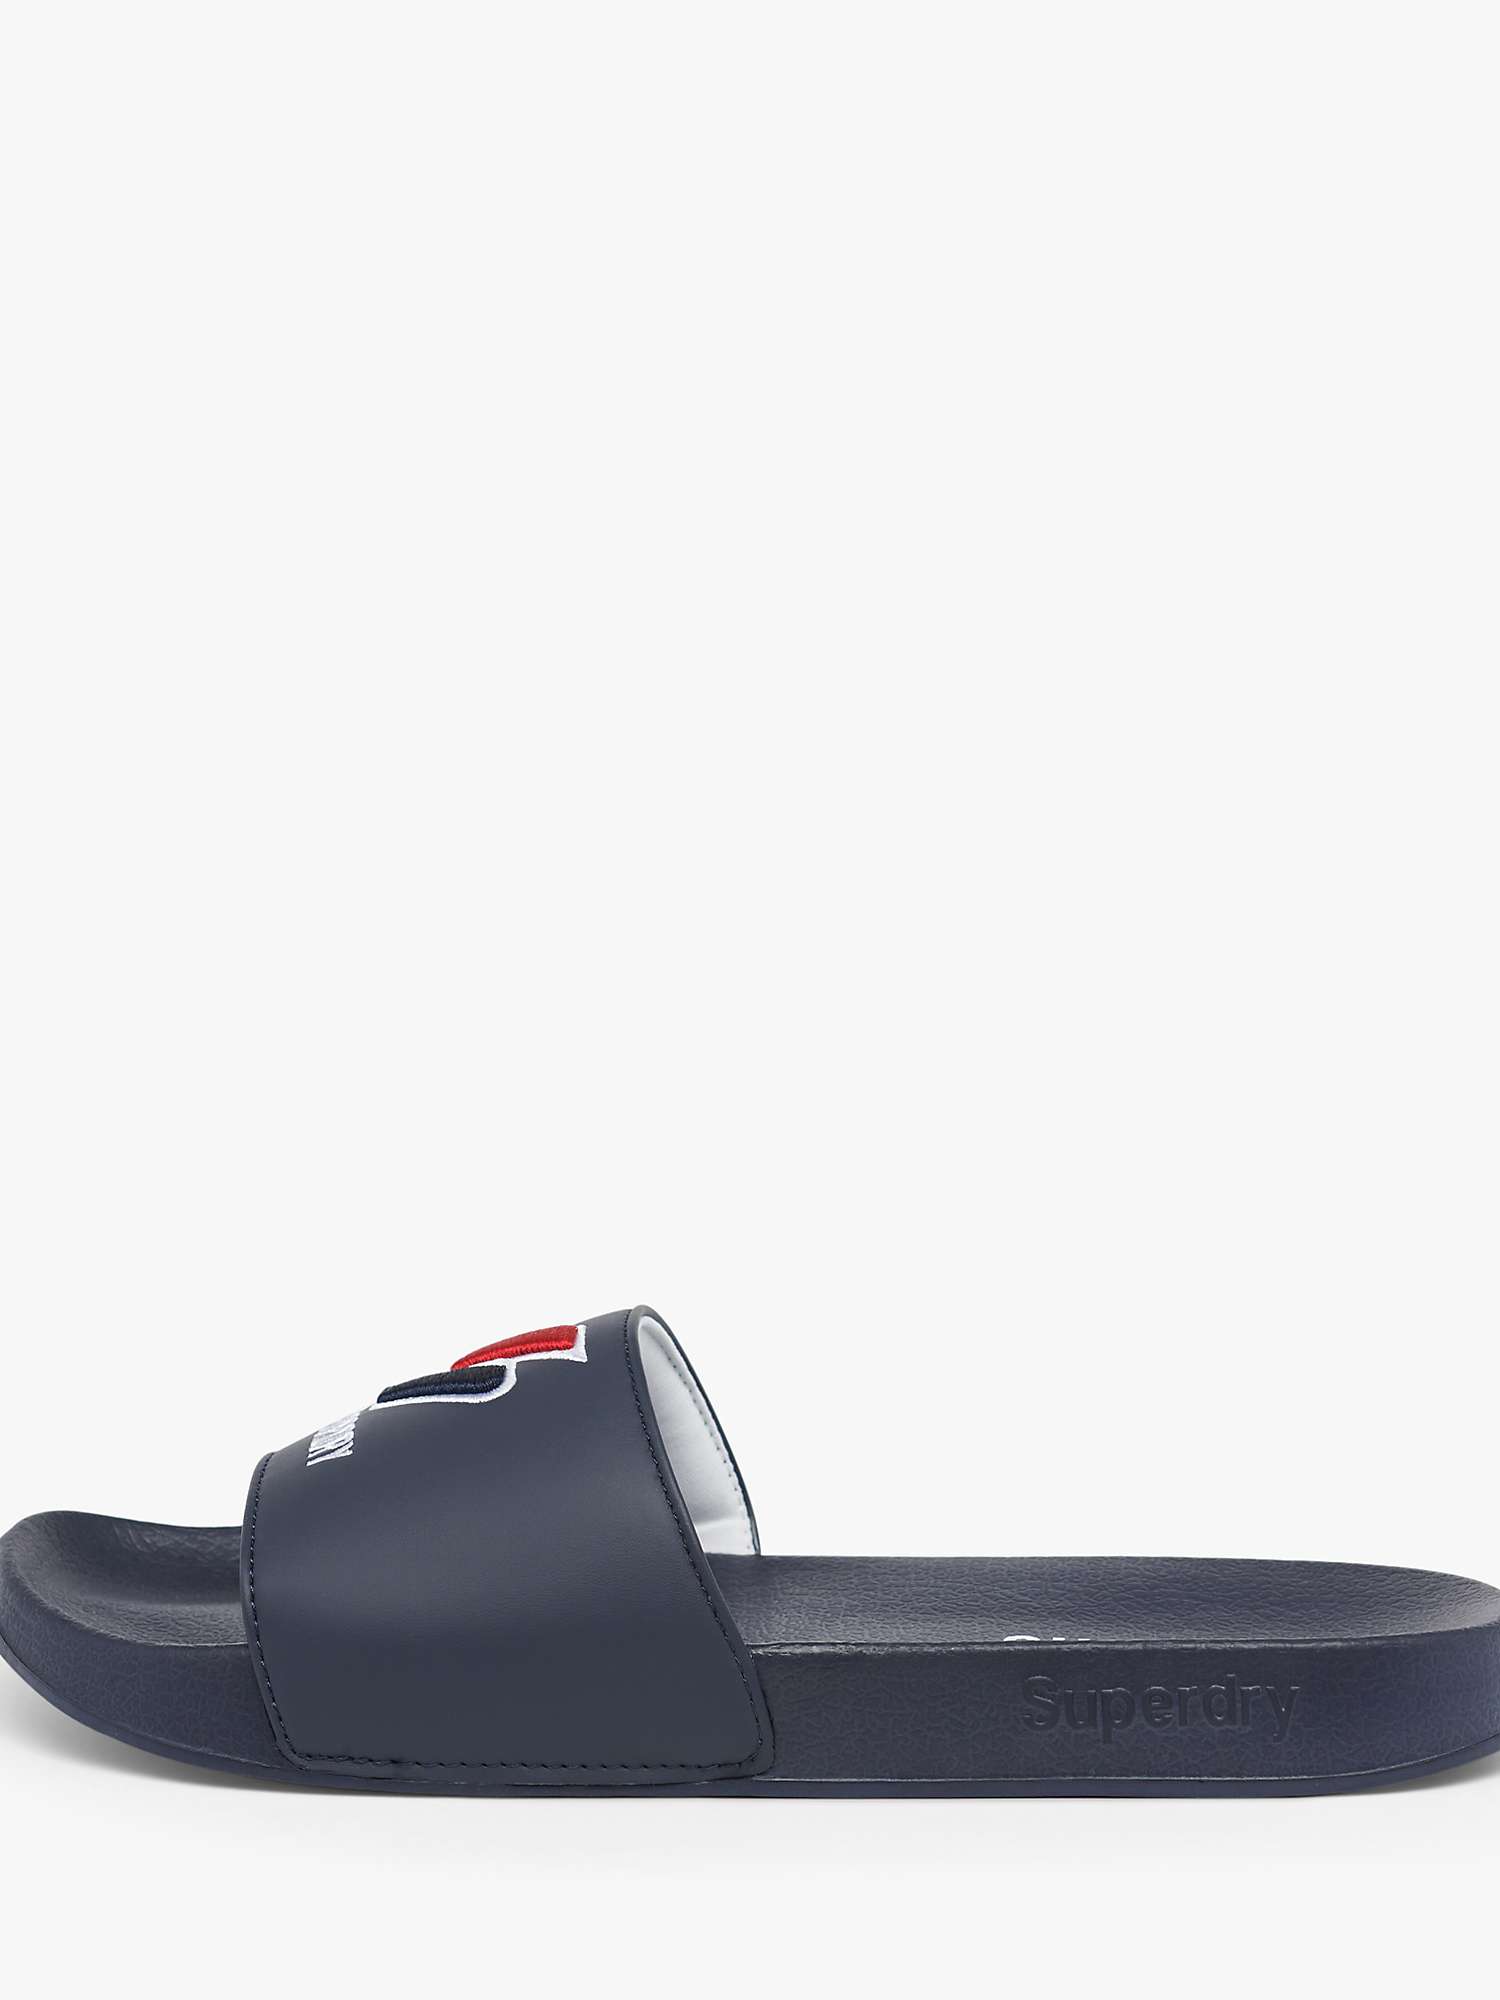 Superdry Core Pool Sliders Eclipse Navy NEW 